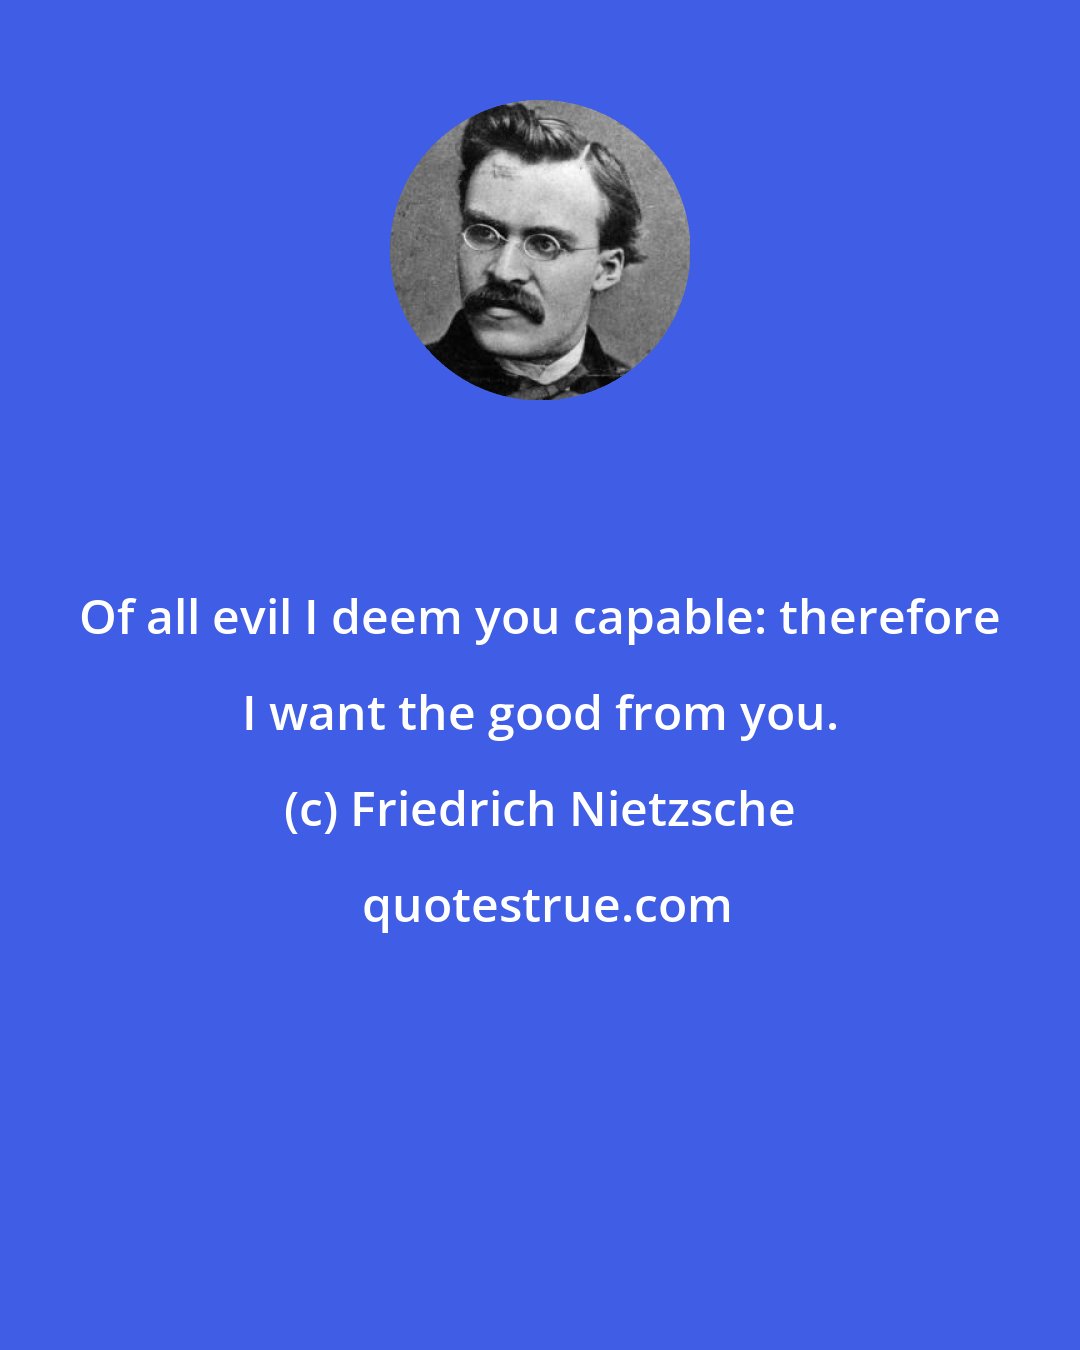 Friedrich Nietzsche: Of all evil I deem you capable: therefore I want the good from you.